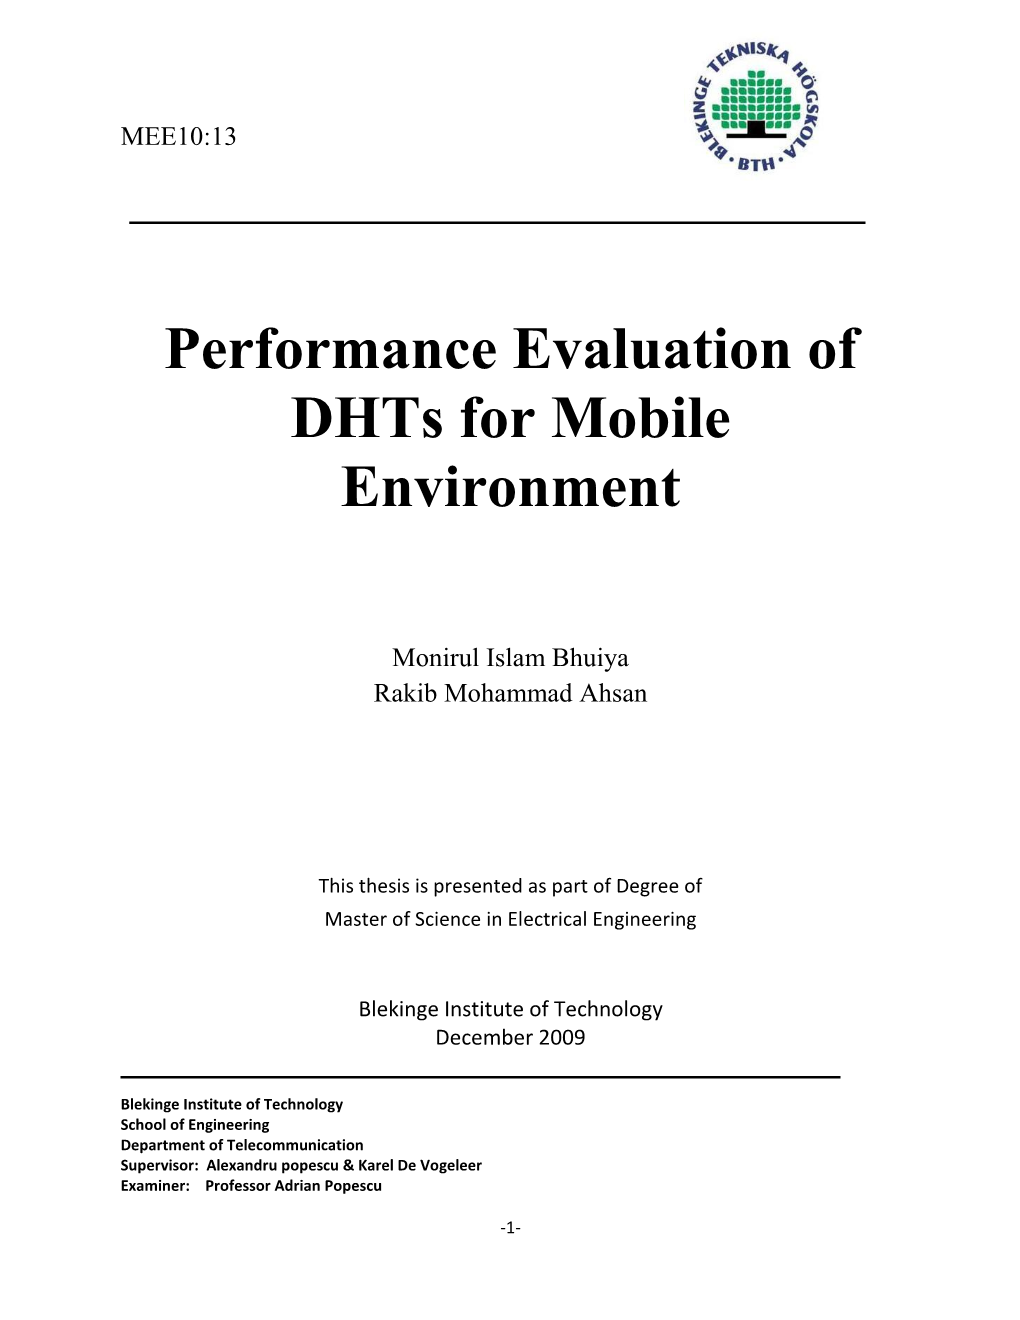 Performance Evaluation of Dhts for Mobile Environment